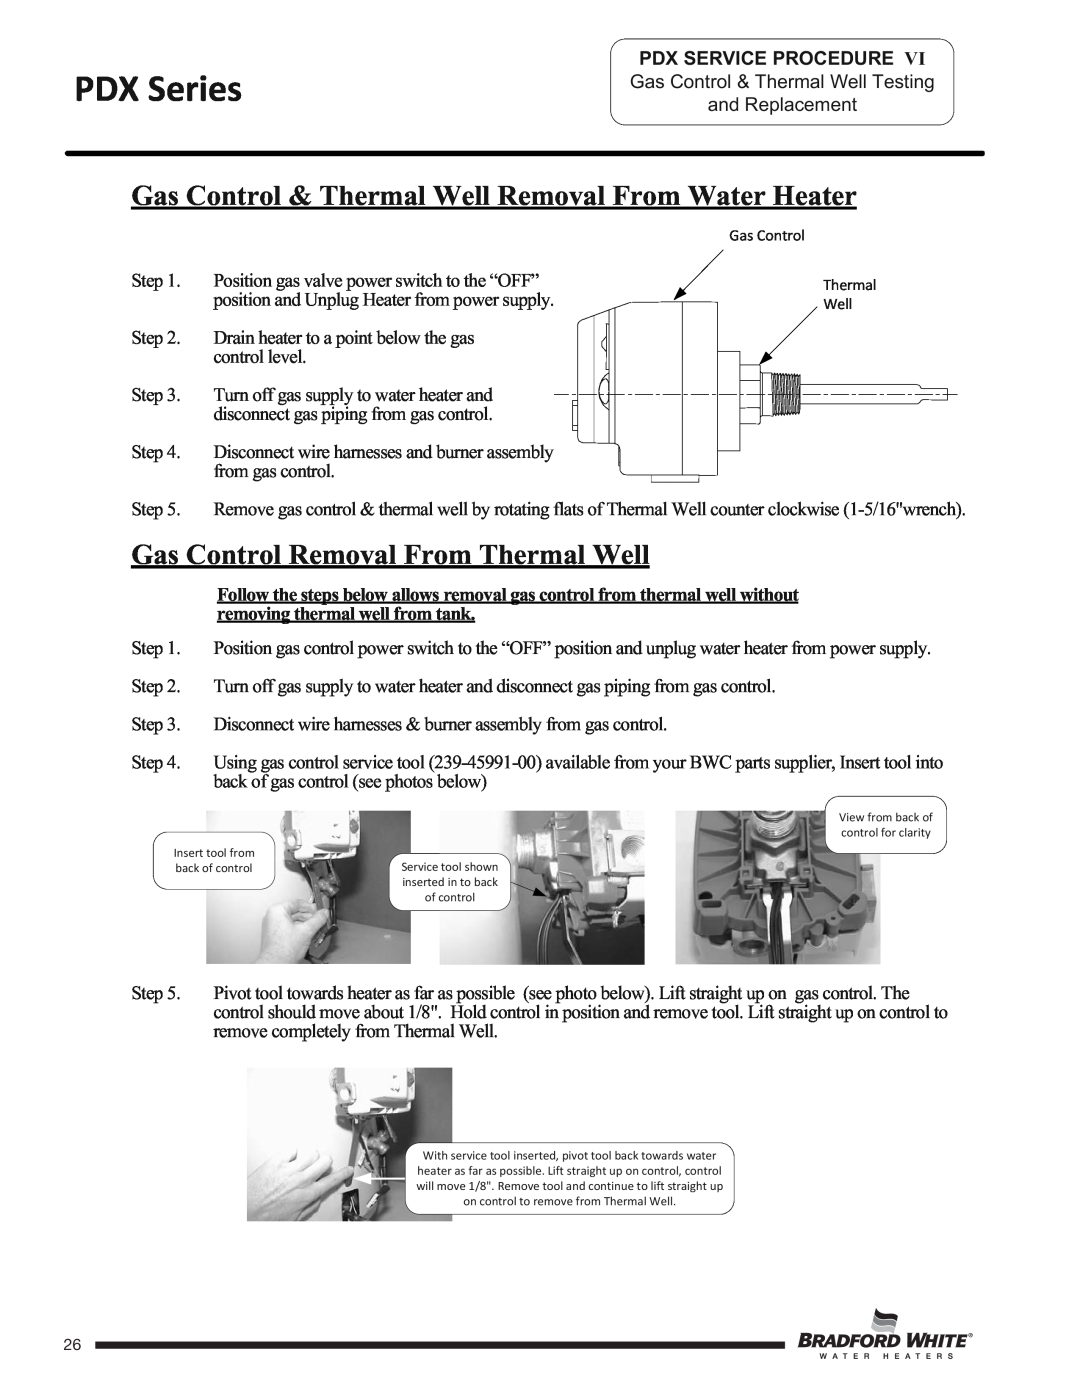 Honeywell PDX265T*F(BN,SX,CX), PDX450S*F(BN,SX) Gas Control Removal From Thermal Well, PDX Series, Pdx Service Procedure 